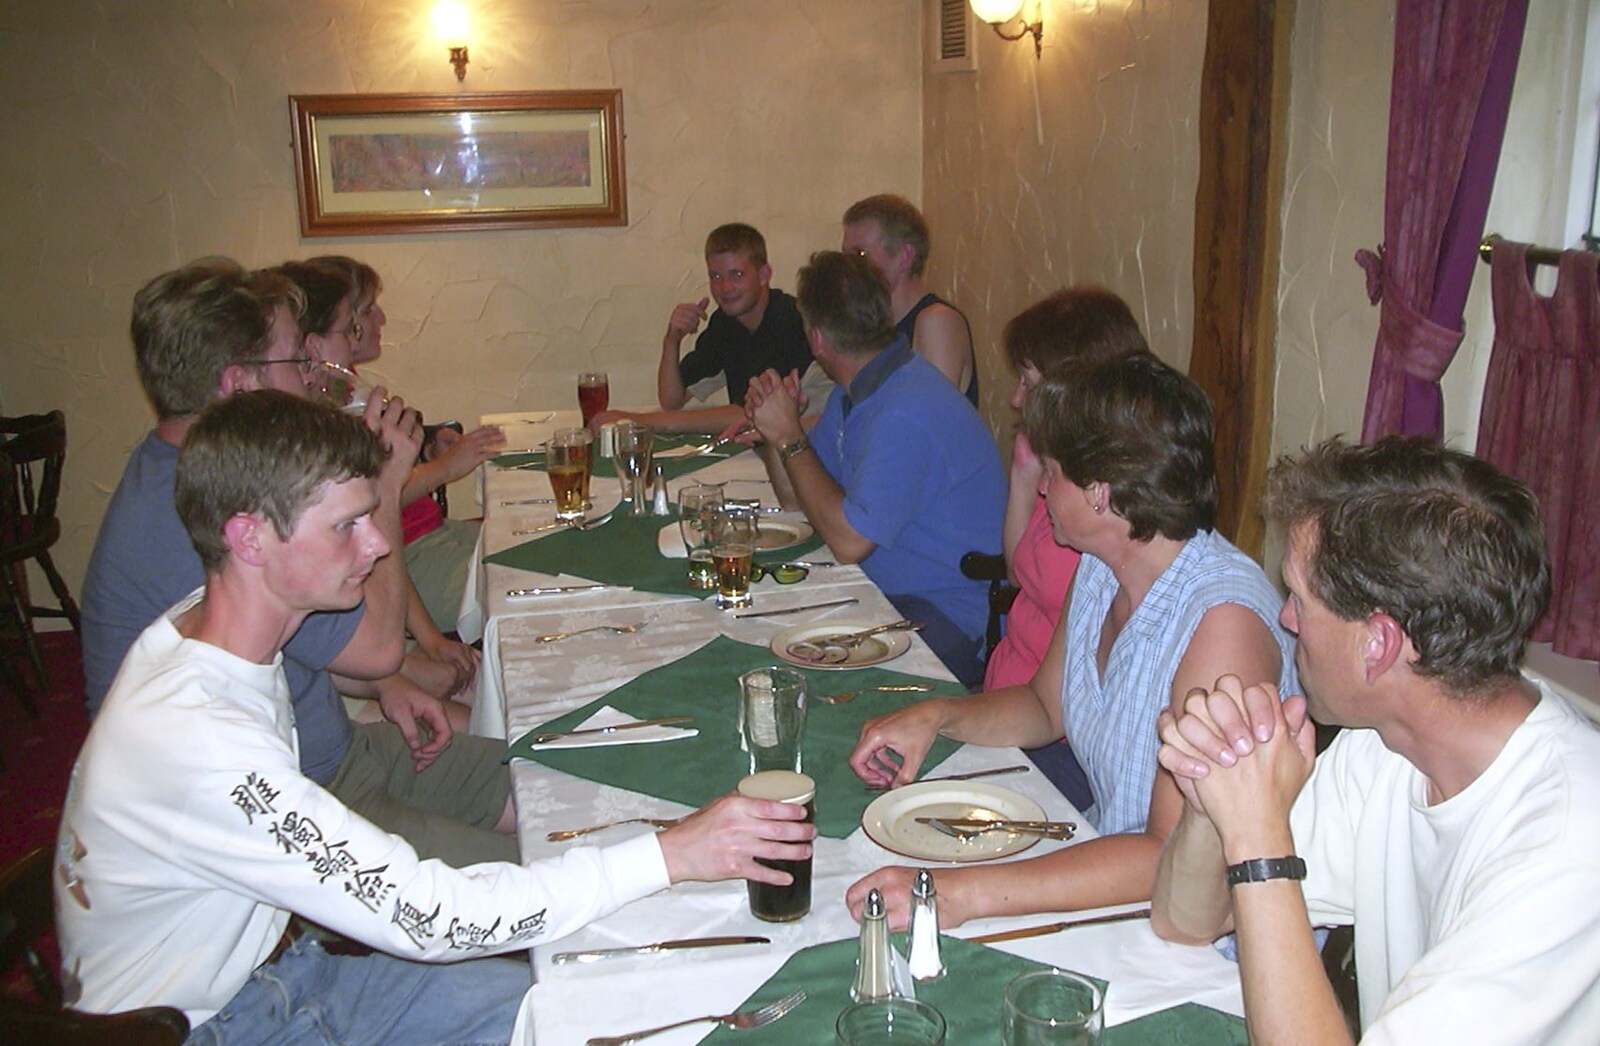 We find a South African restaurant in the middle of nowhere from A BSCC Camping Trip to the Fox Inn, Shadingfield, Suffolk - 9th August 2003